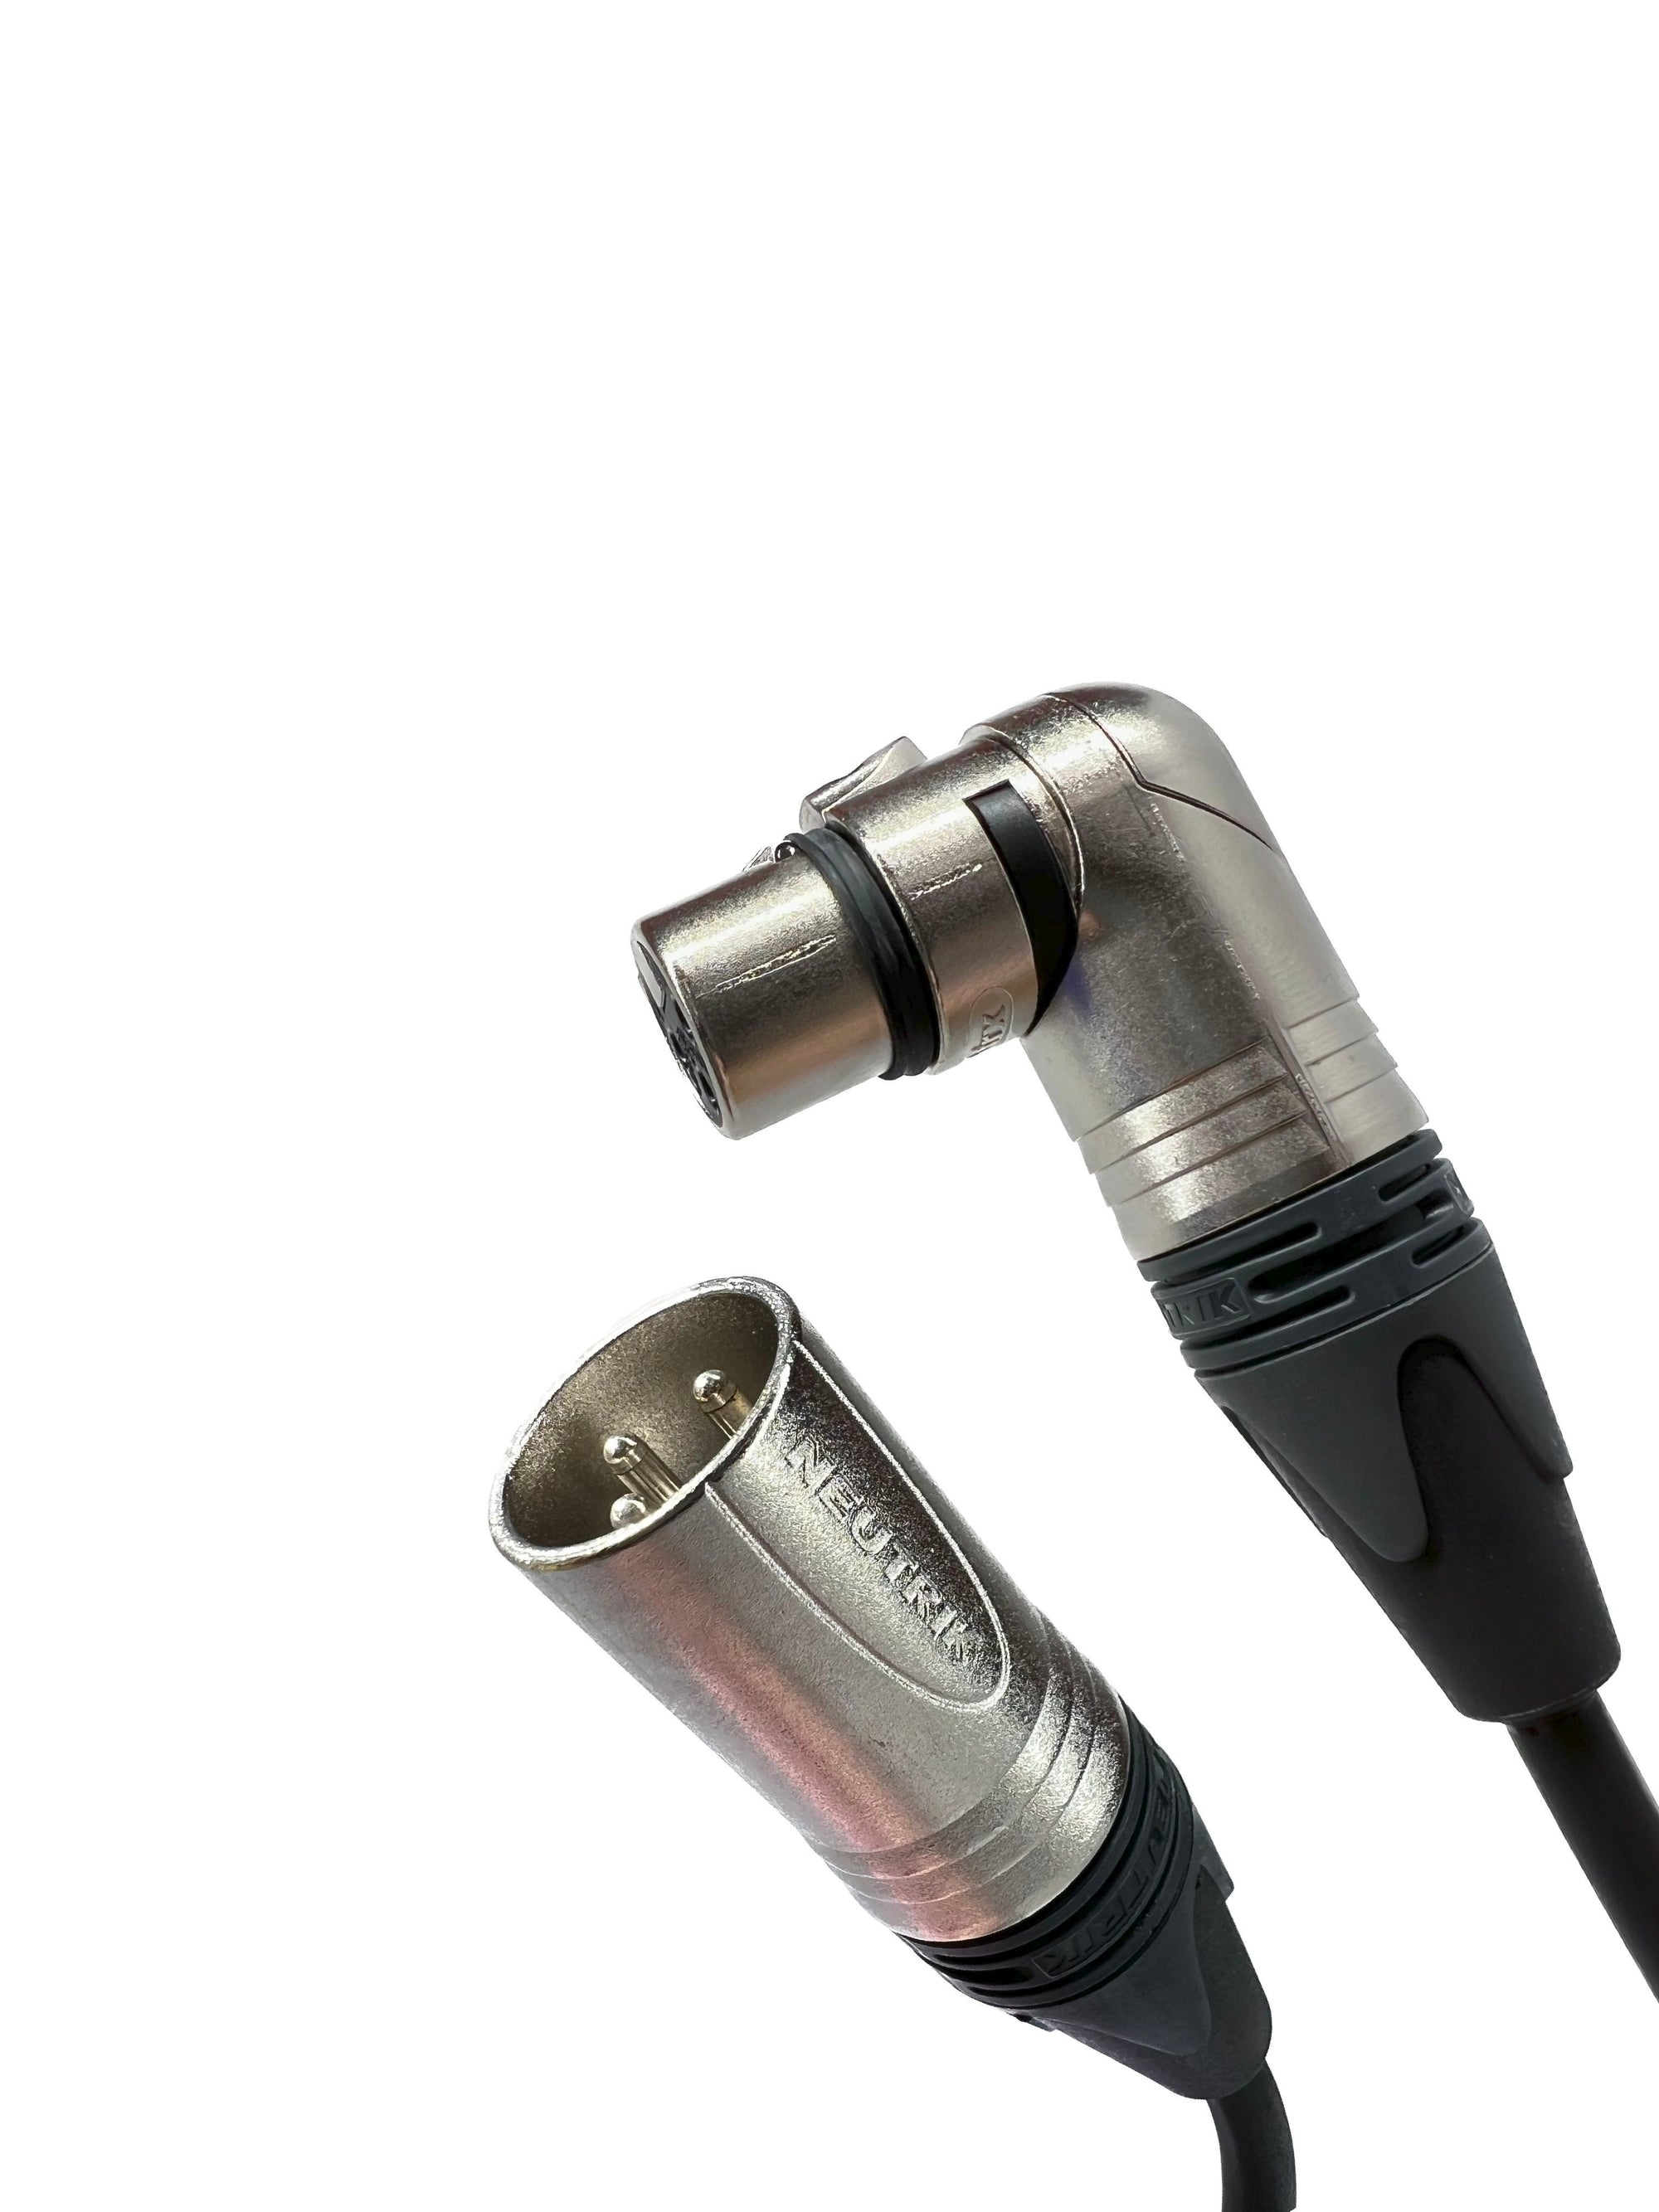 Balanced XLR Male to 1/4 TRS Right Angle Audio Cables with Neutrik Con -  Custom Cable Connection